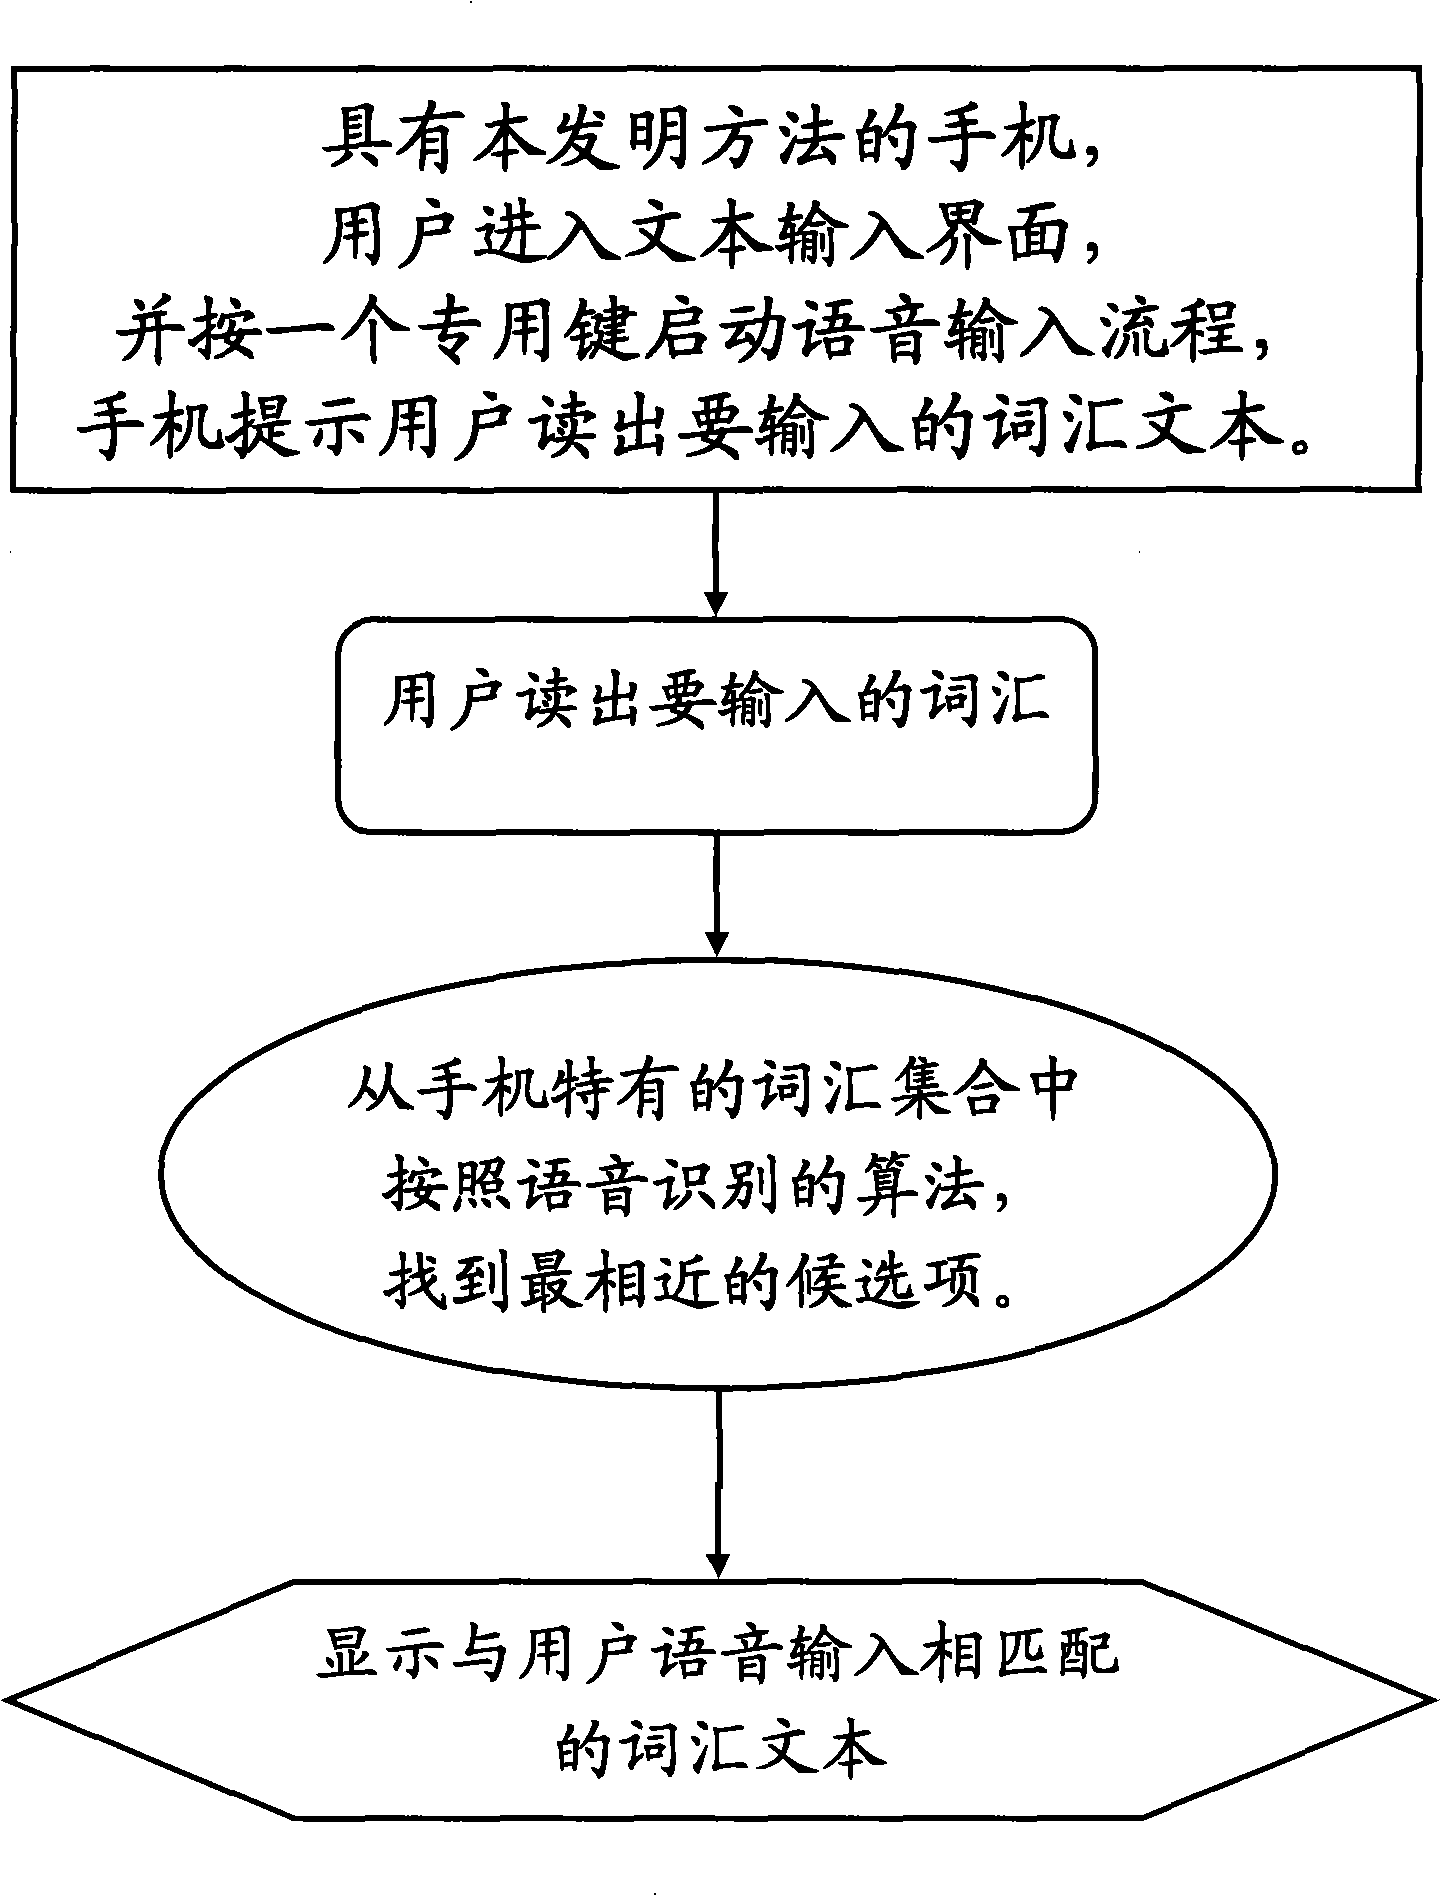 Method for inputting special words through voice for mobile phone